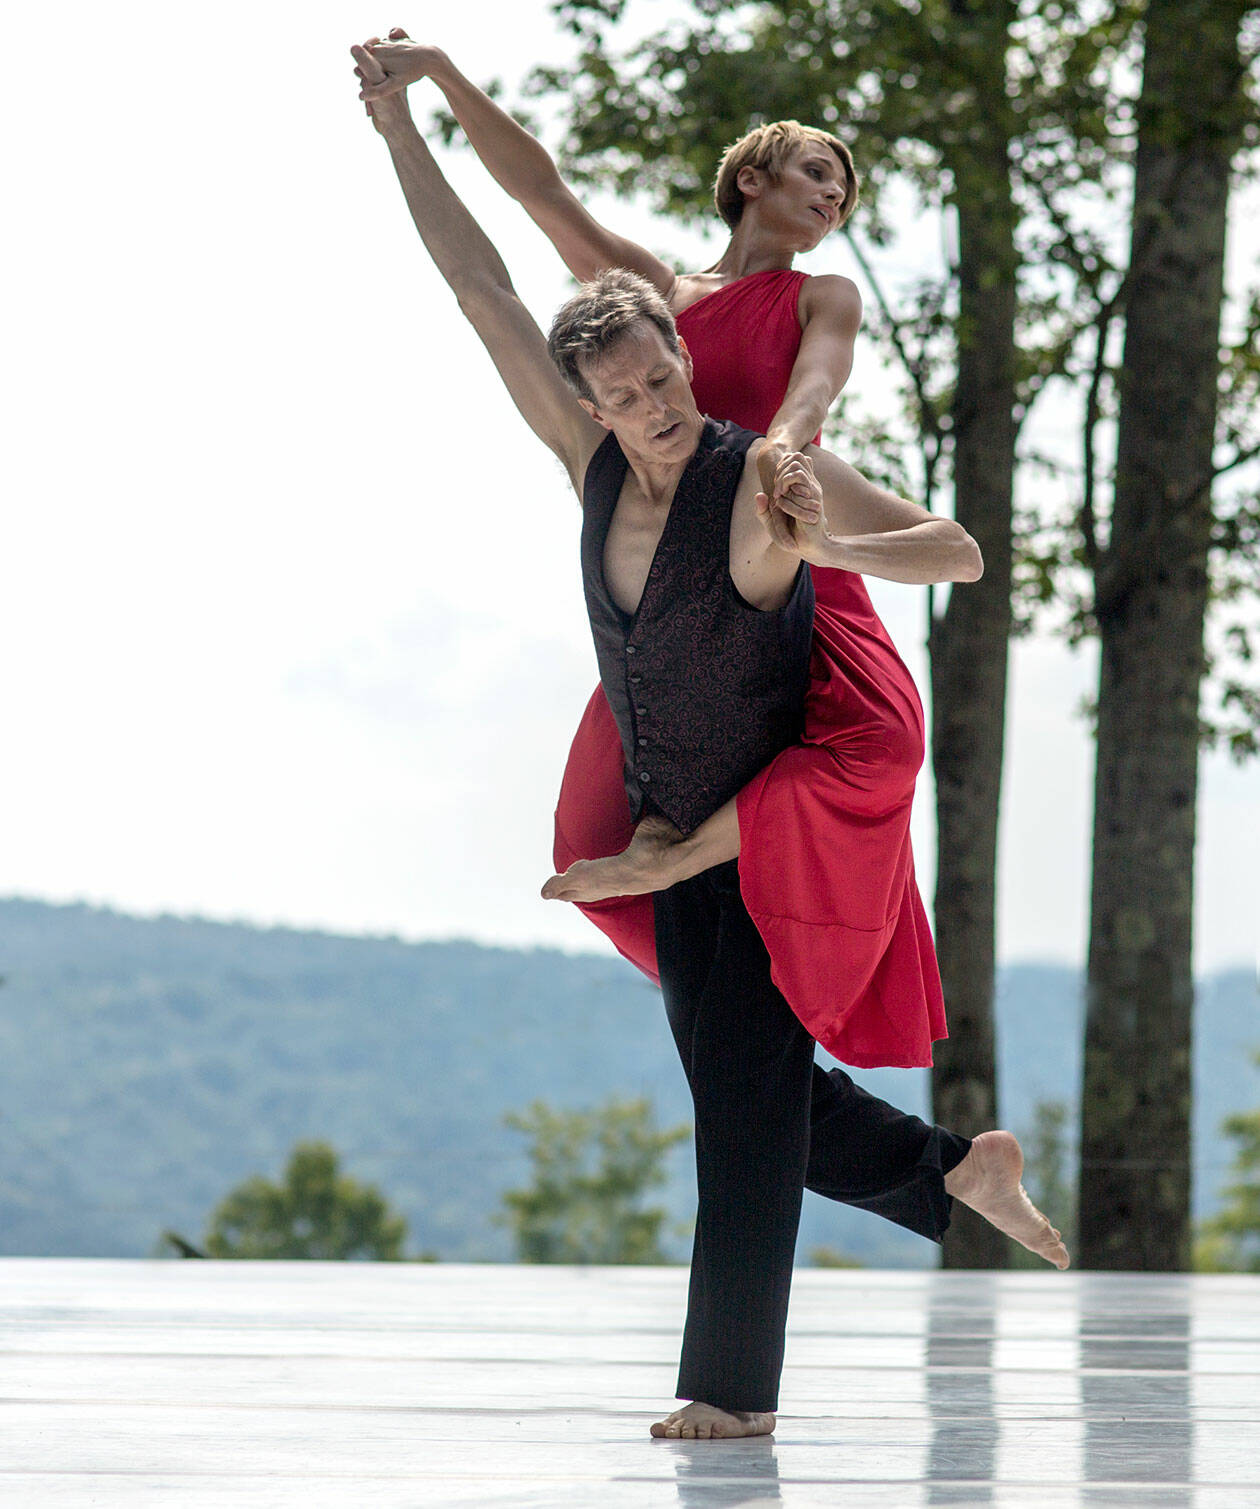 Don Halquist and Leanne Rinelli dance in Tres Tangos, choreographed by Bill Evans, at the Jacob's Pillow Dance Festival in Becket, Mass.